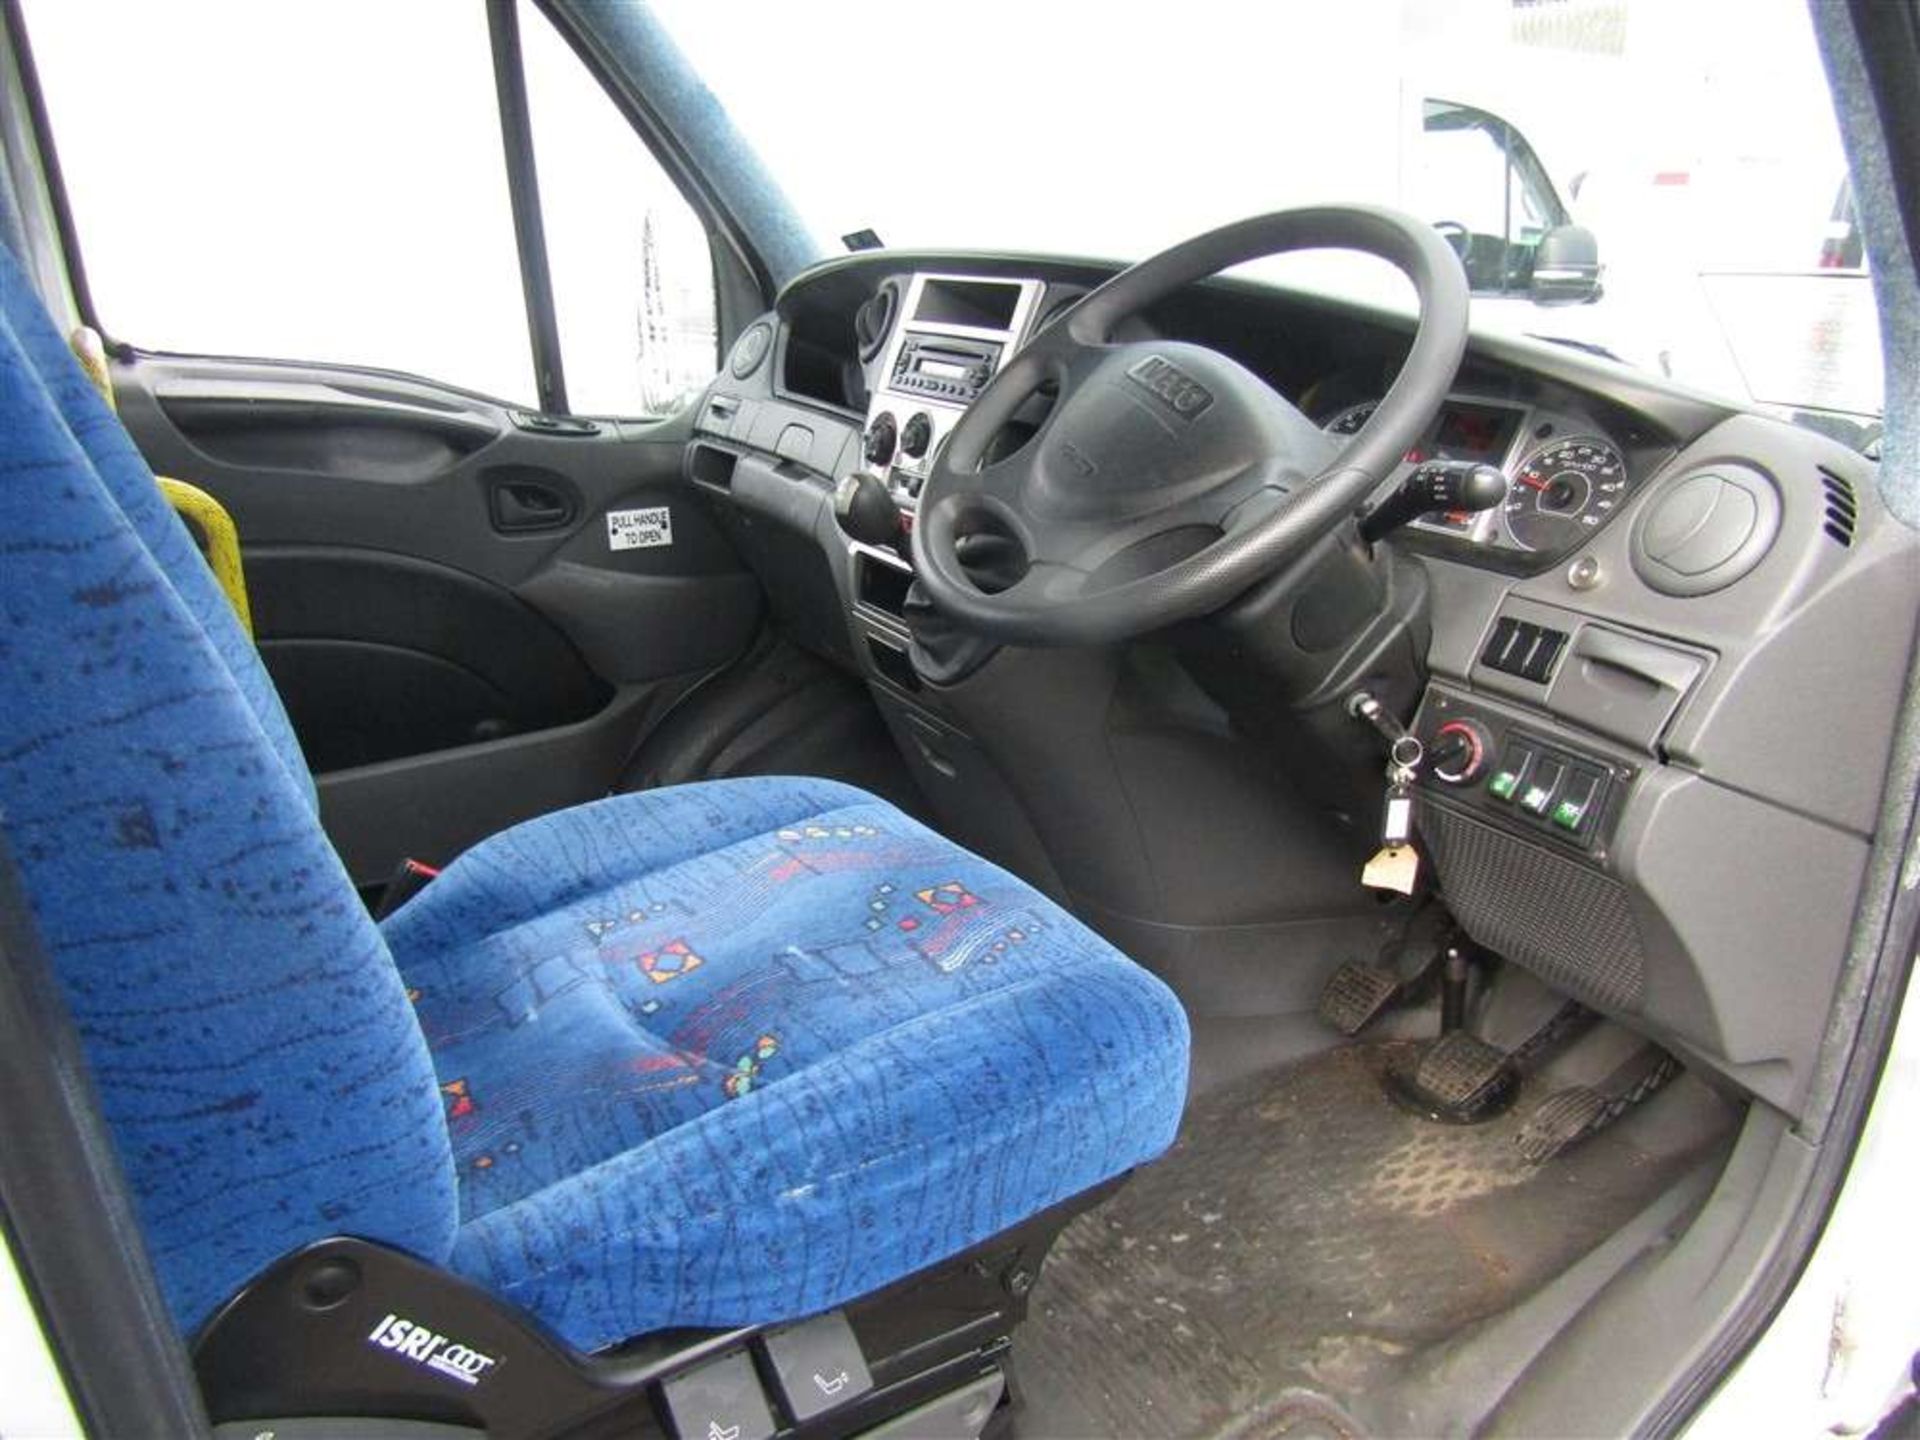 2011 11 reg Iveco Daily 35S11 MWB 10 seater Minibus (Direct NHS) - Image 6 of 7